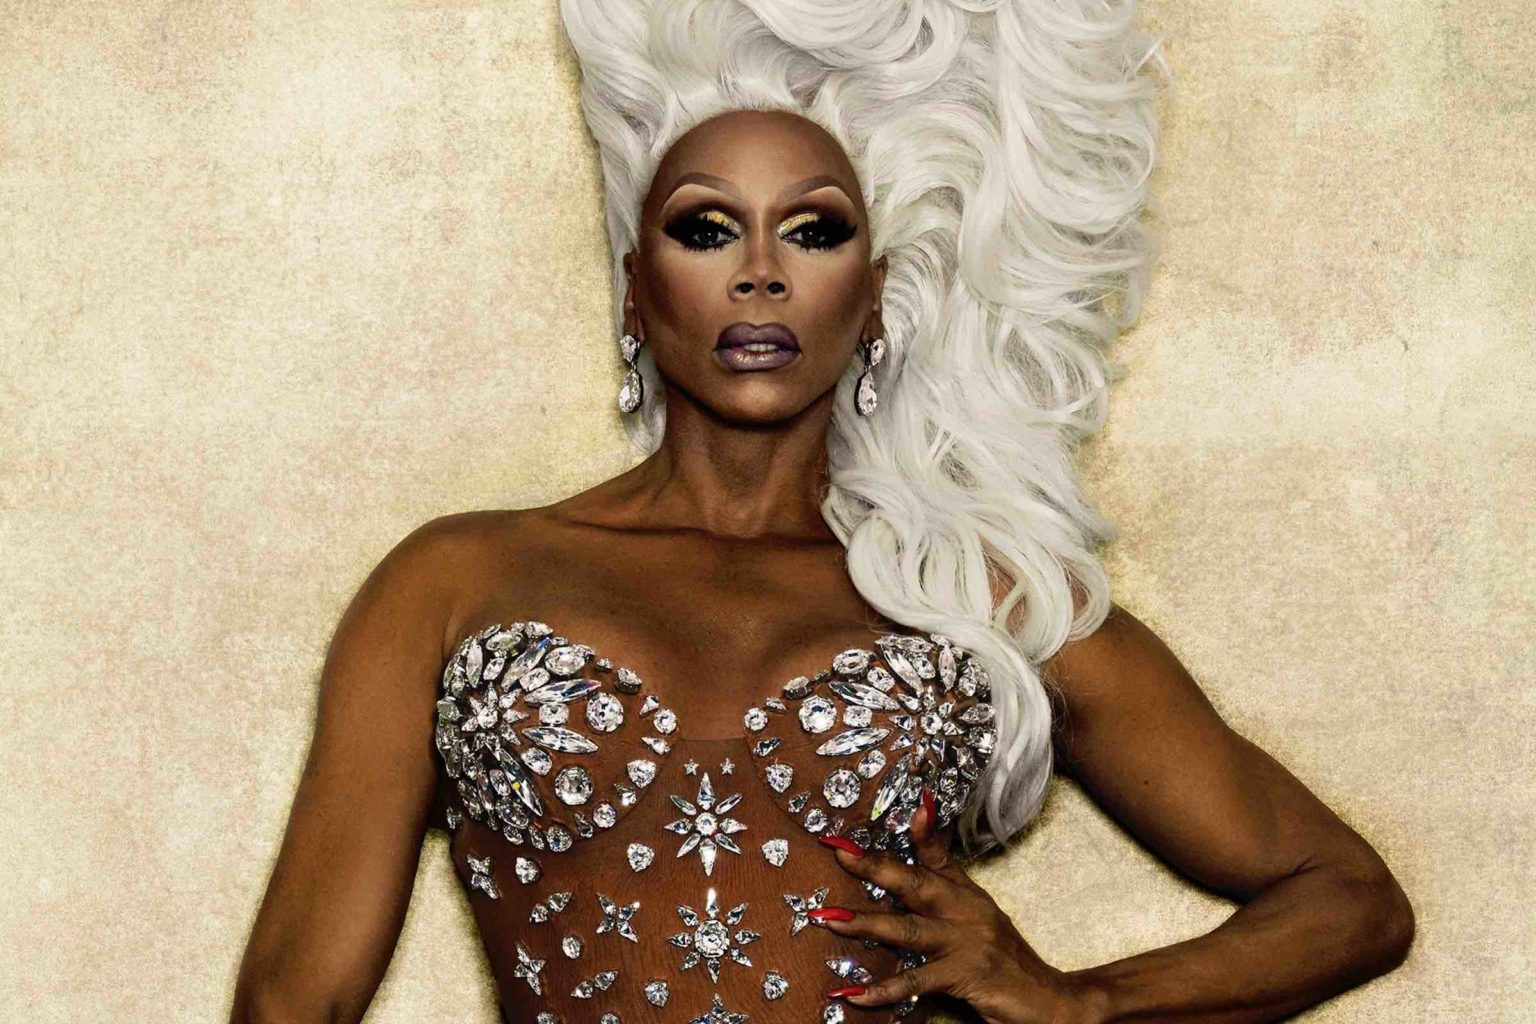 Get ready to bring some new charisma, uniqueness, nerve, and talent into the world, hunty. Here are the best LGBT RuPaul quotes to live by.